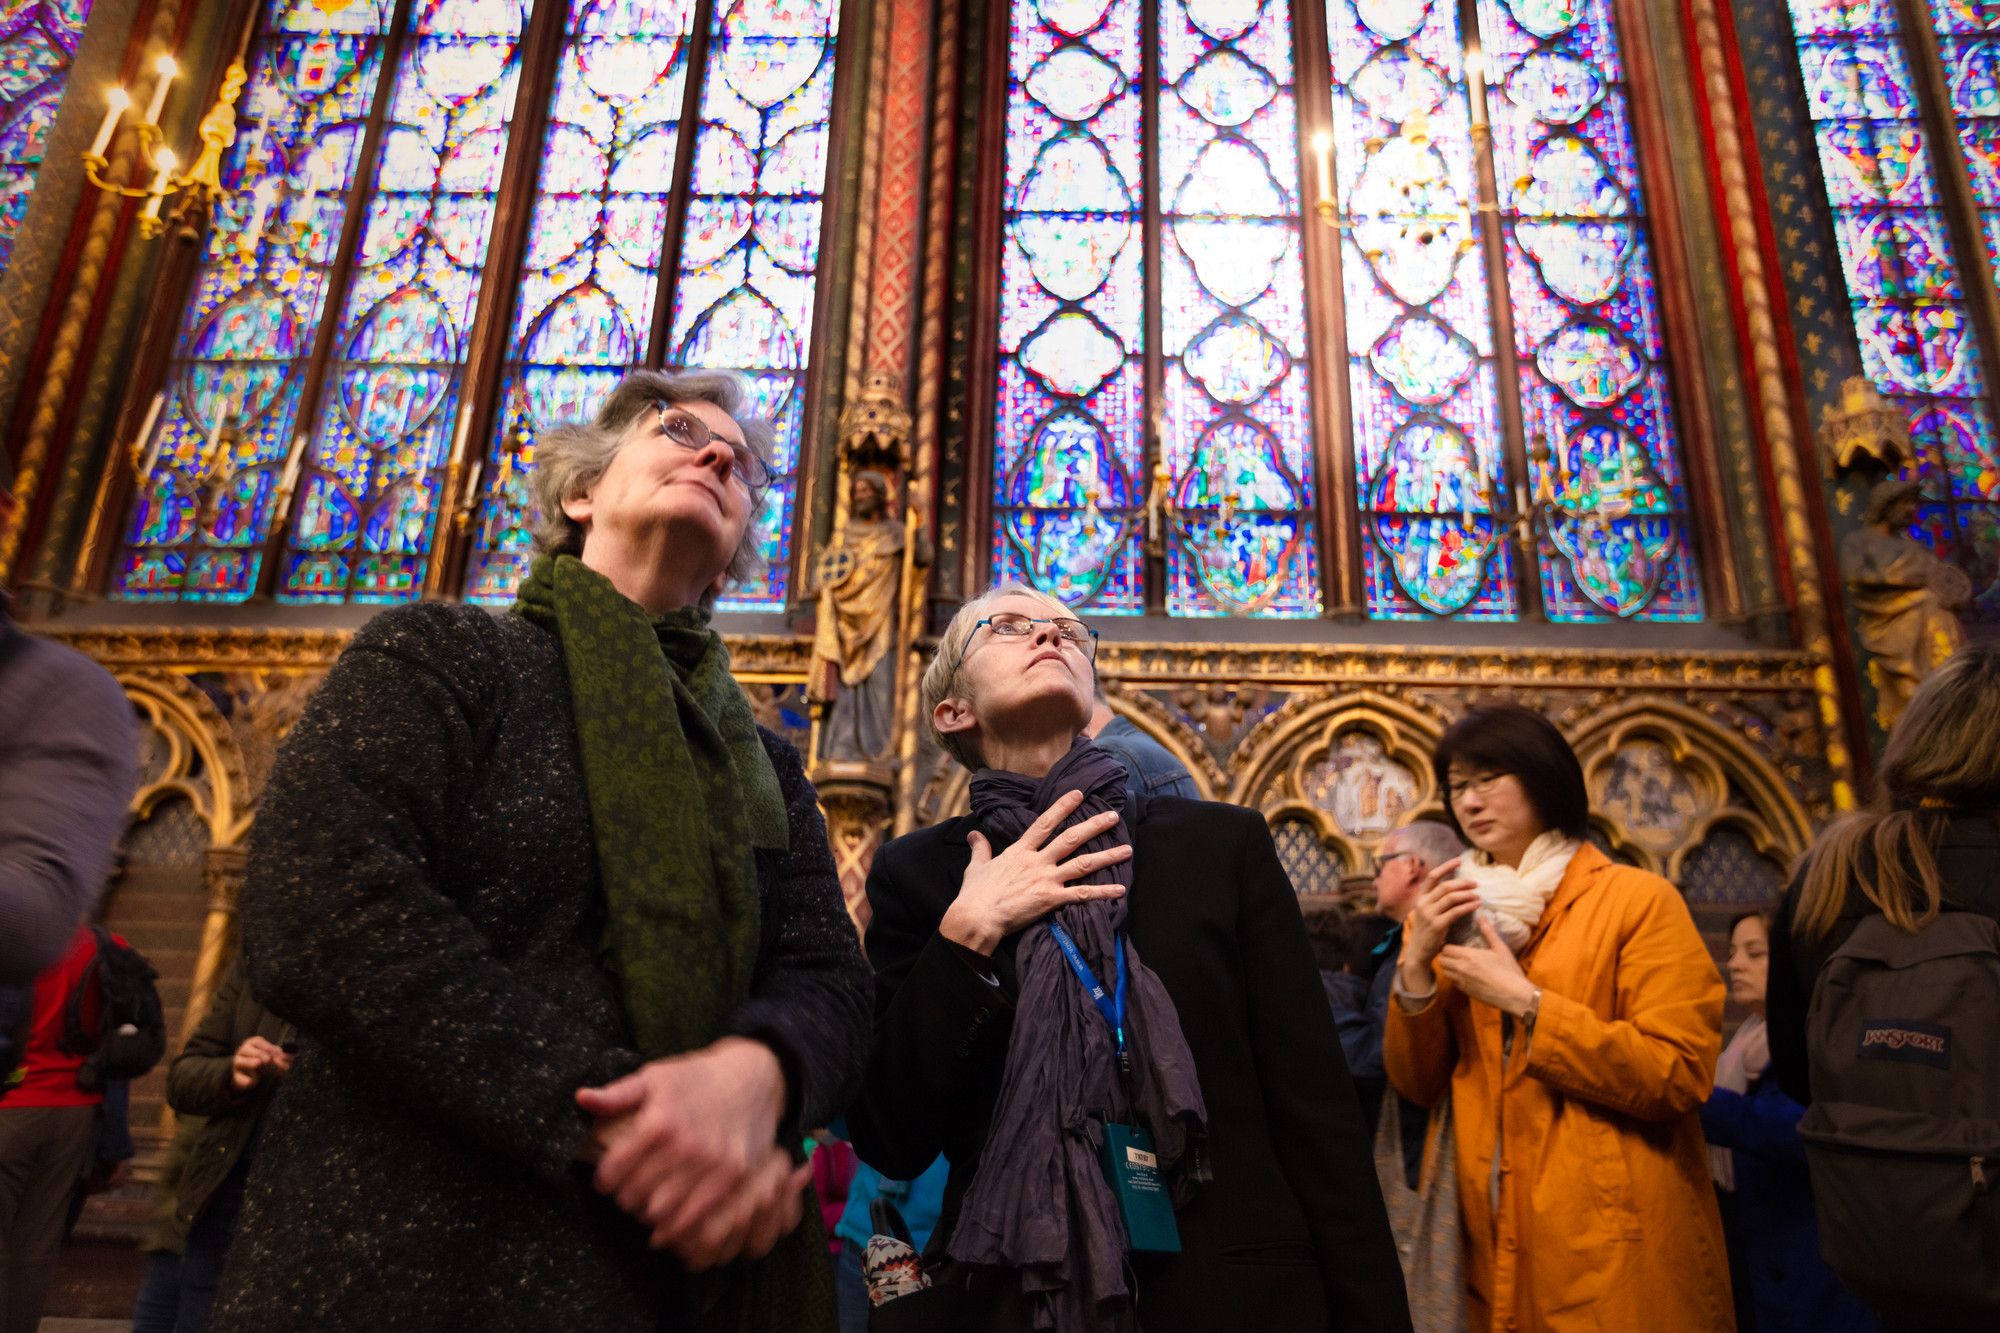 Two women gaze at stained glass